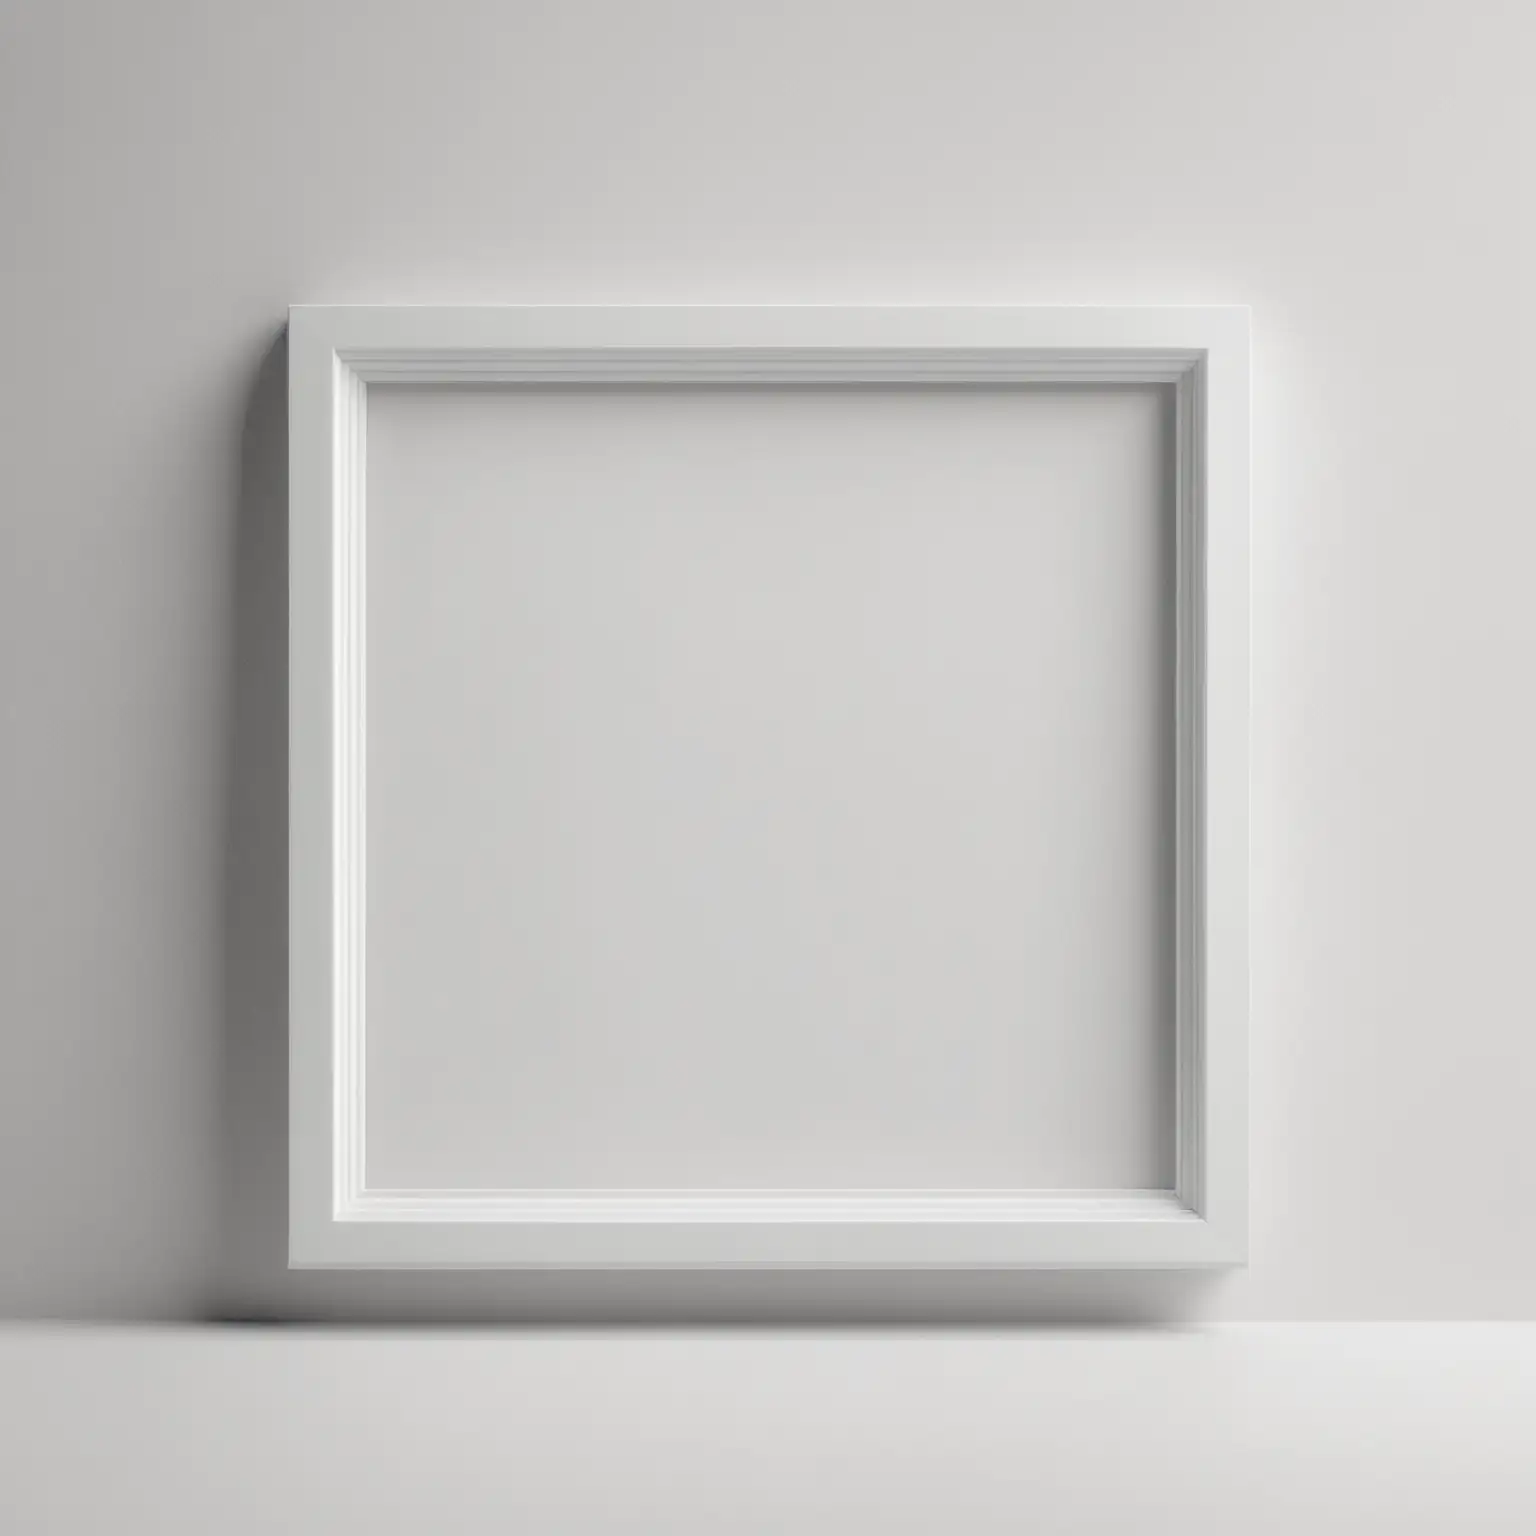 Photo of a flat photo frame, white color, square shape, with good lighting and 4k details. Captured in a high-resolution studio setting against a clean white backdrop, showcasing its artisanal craftsmanship. --ar 3:4 --v 6.0 --iw .5